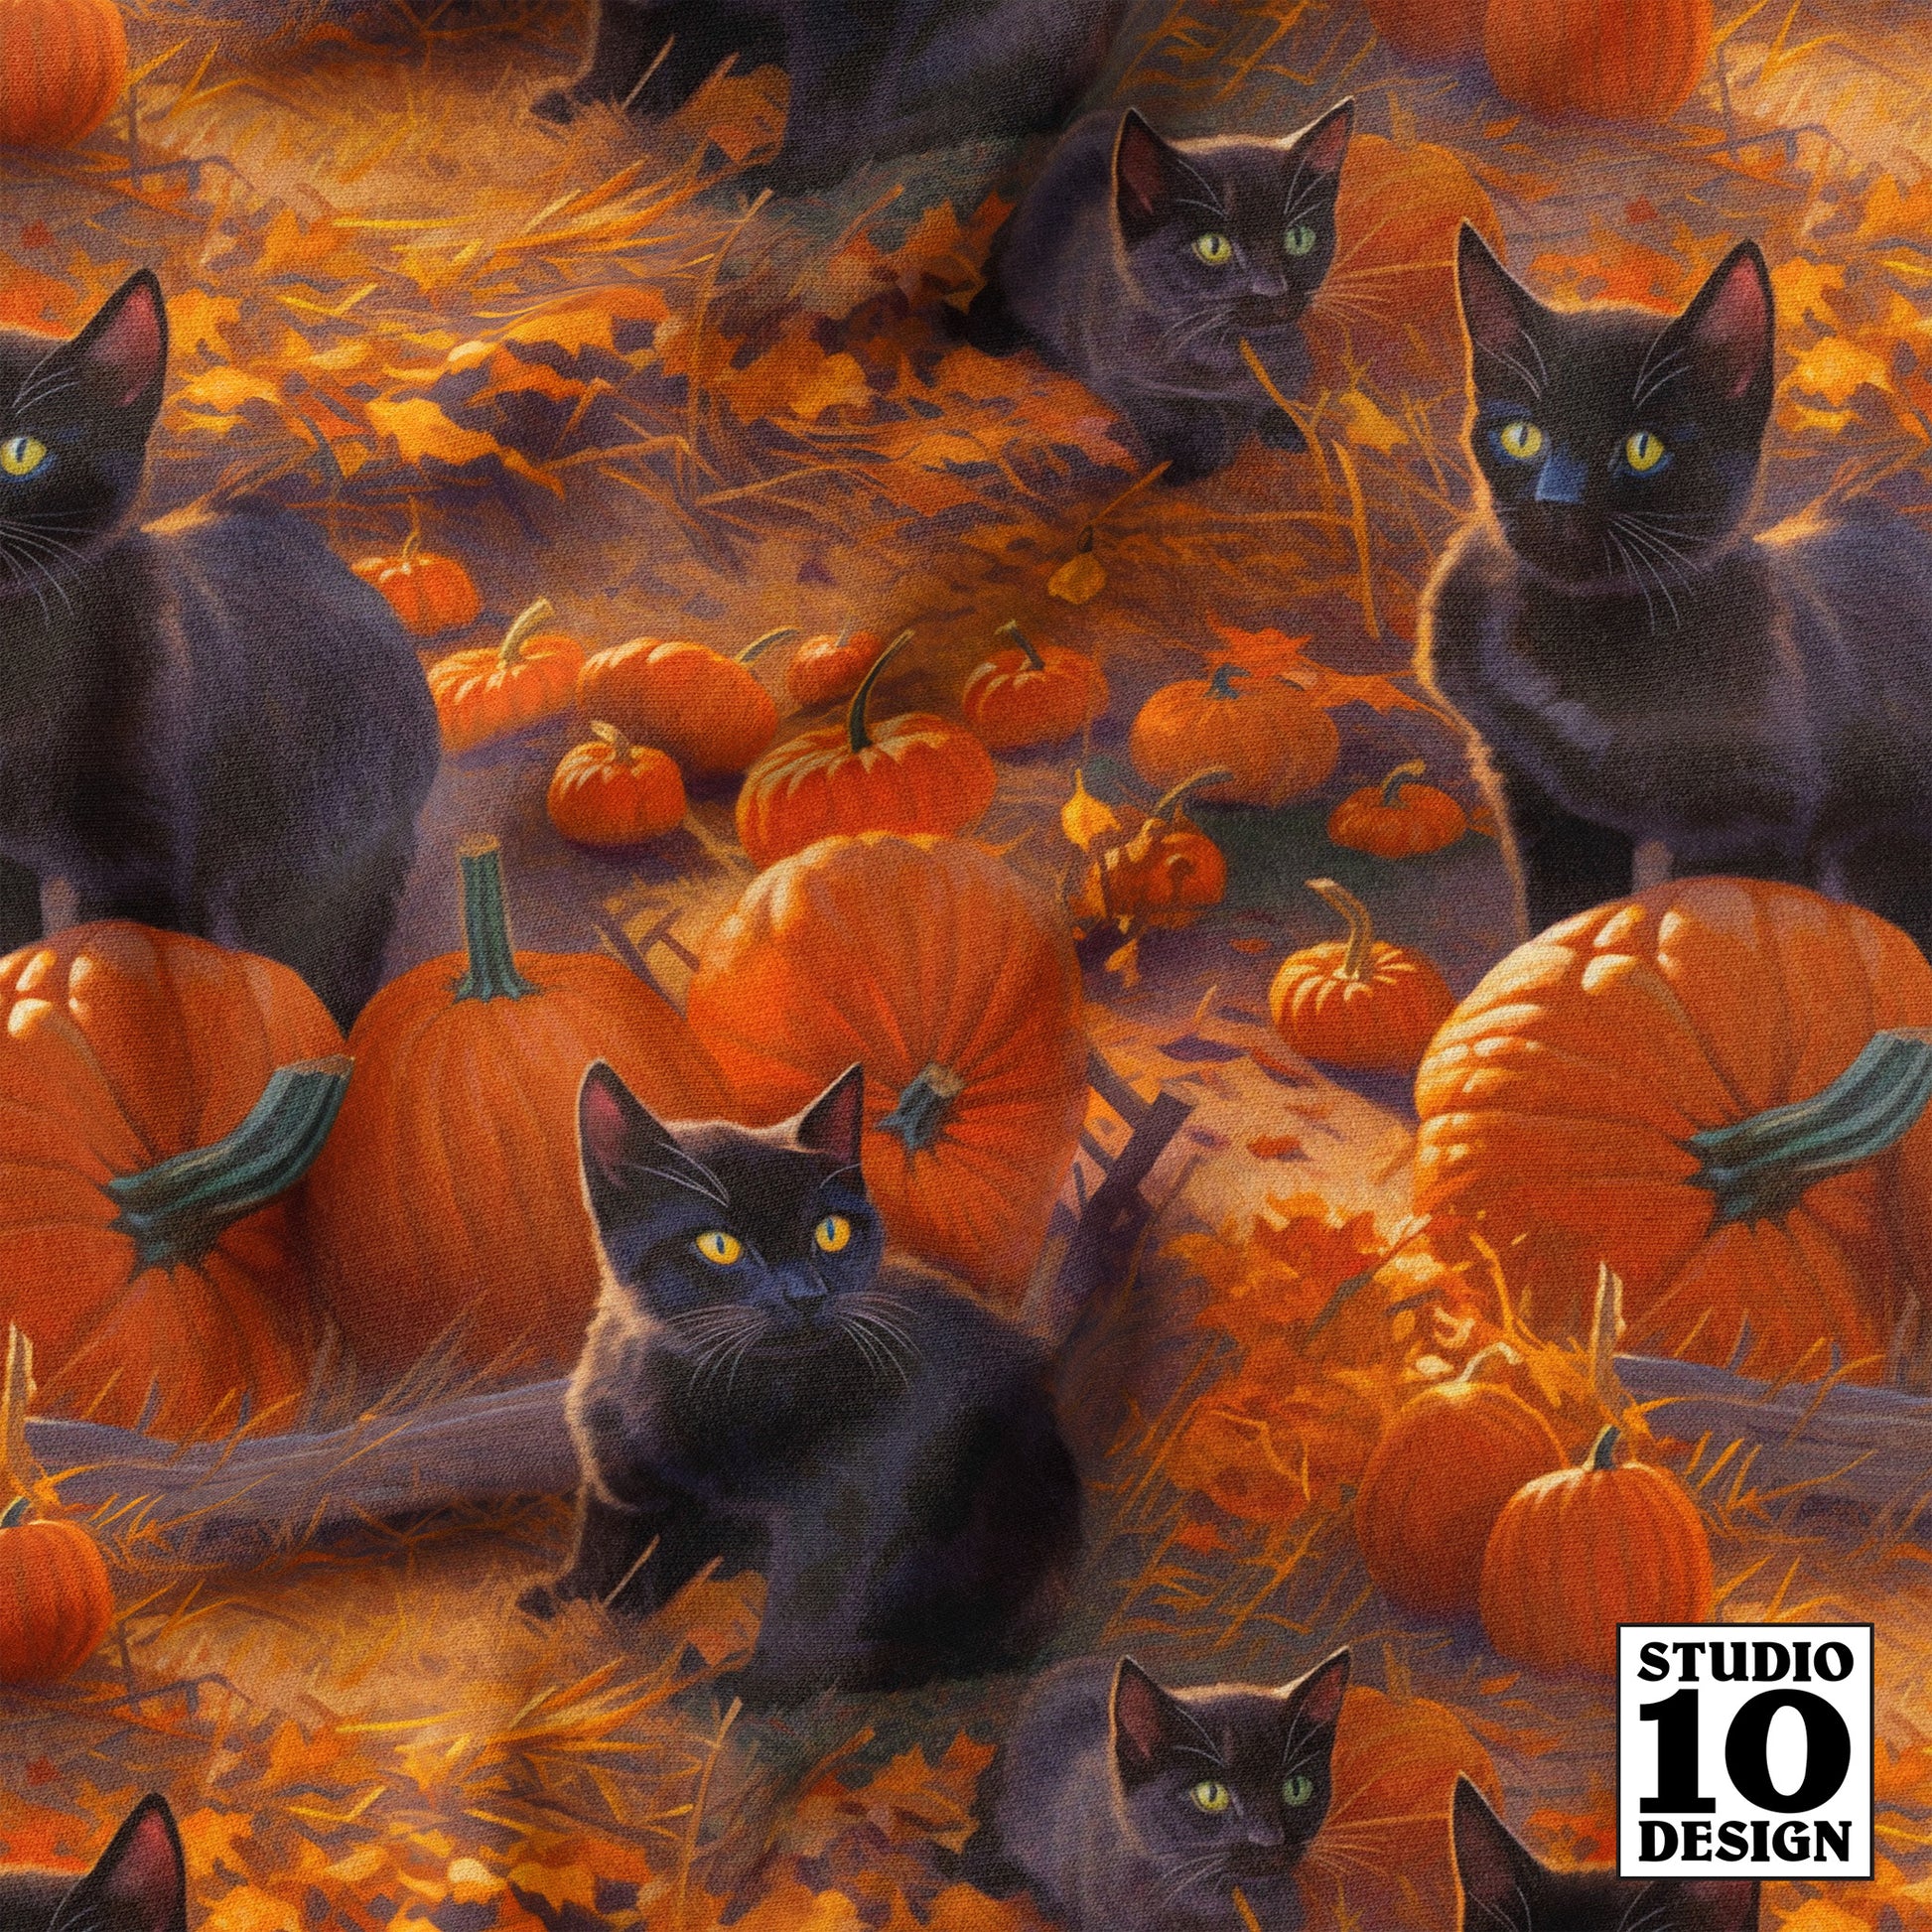 Black Cats in the Pumpkin Patch Printed Fabric by Studio Ten Design